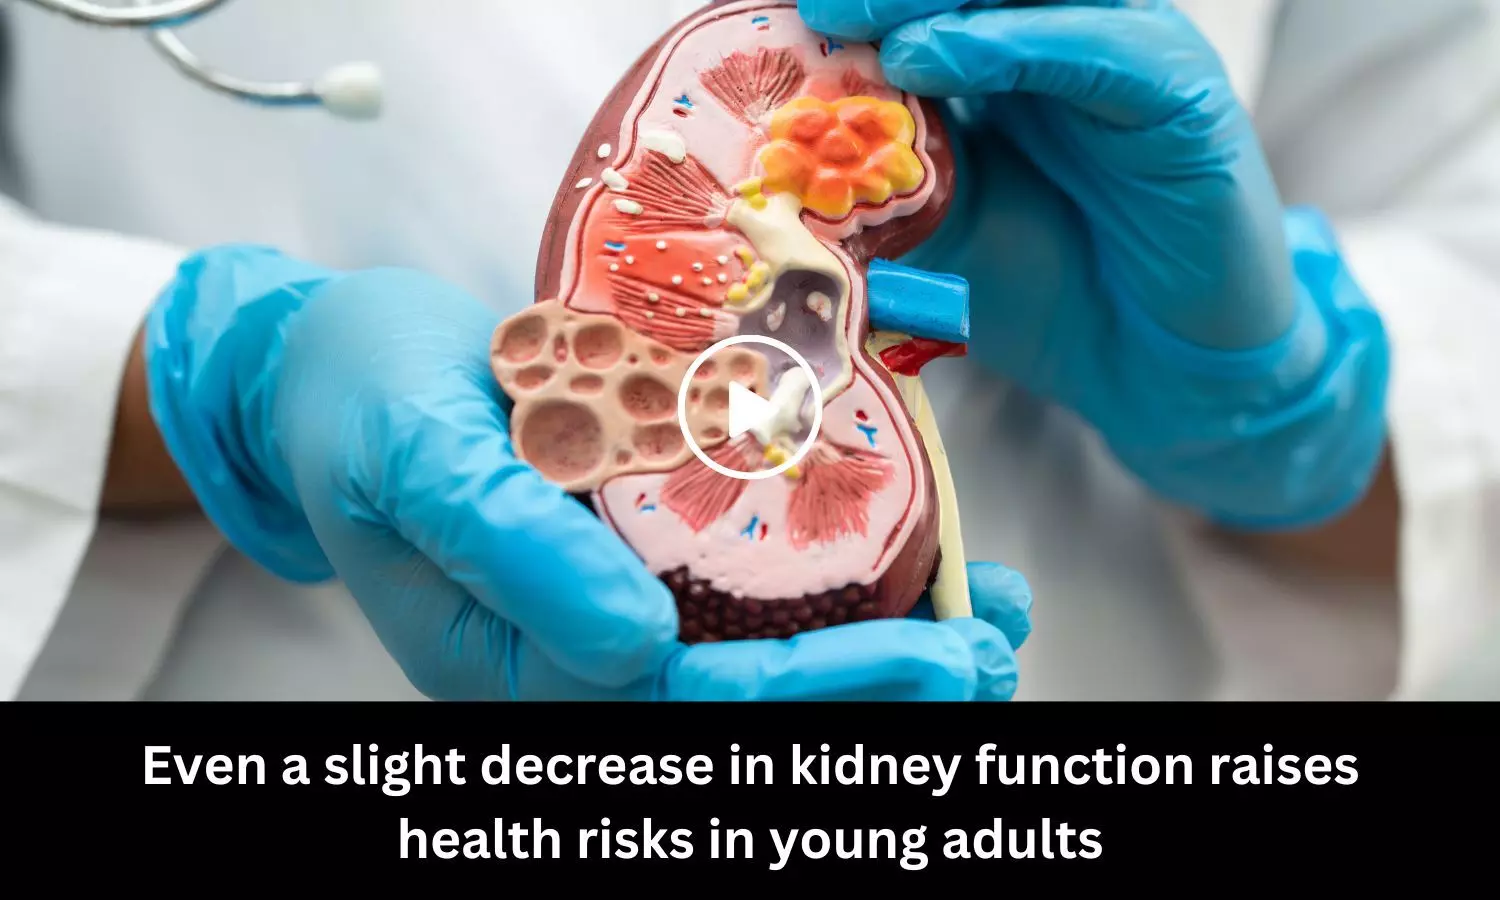 Even a slight decrease in kidney function raises health risks in young adults.